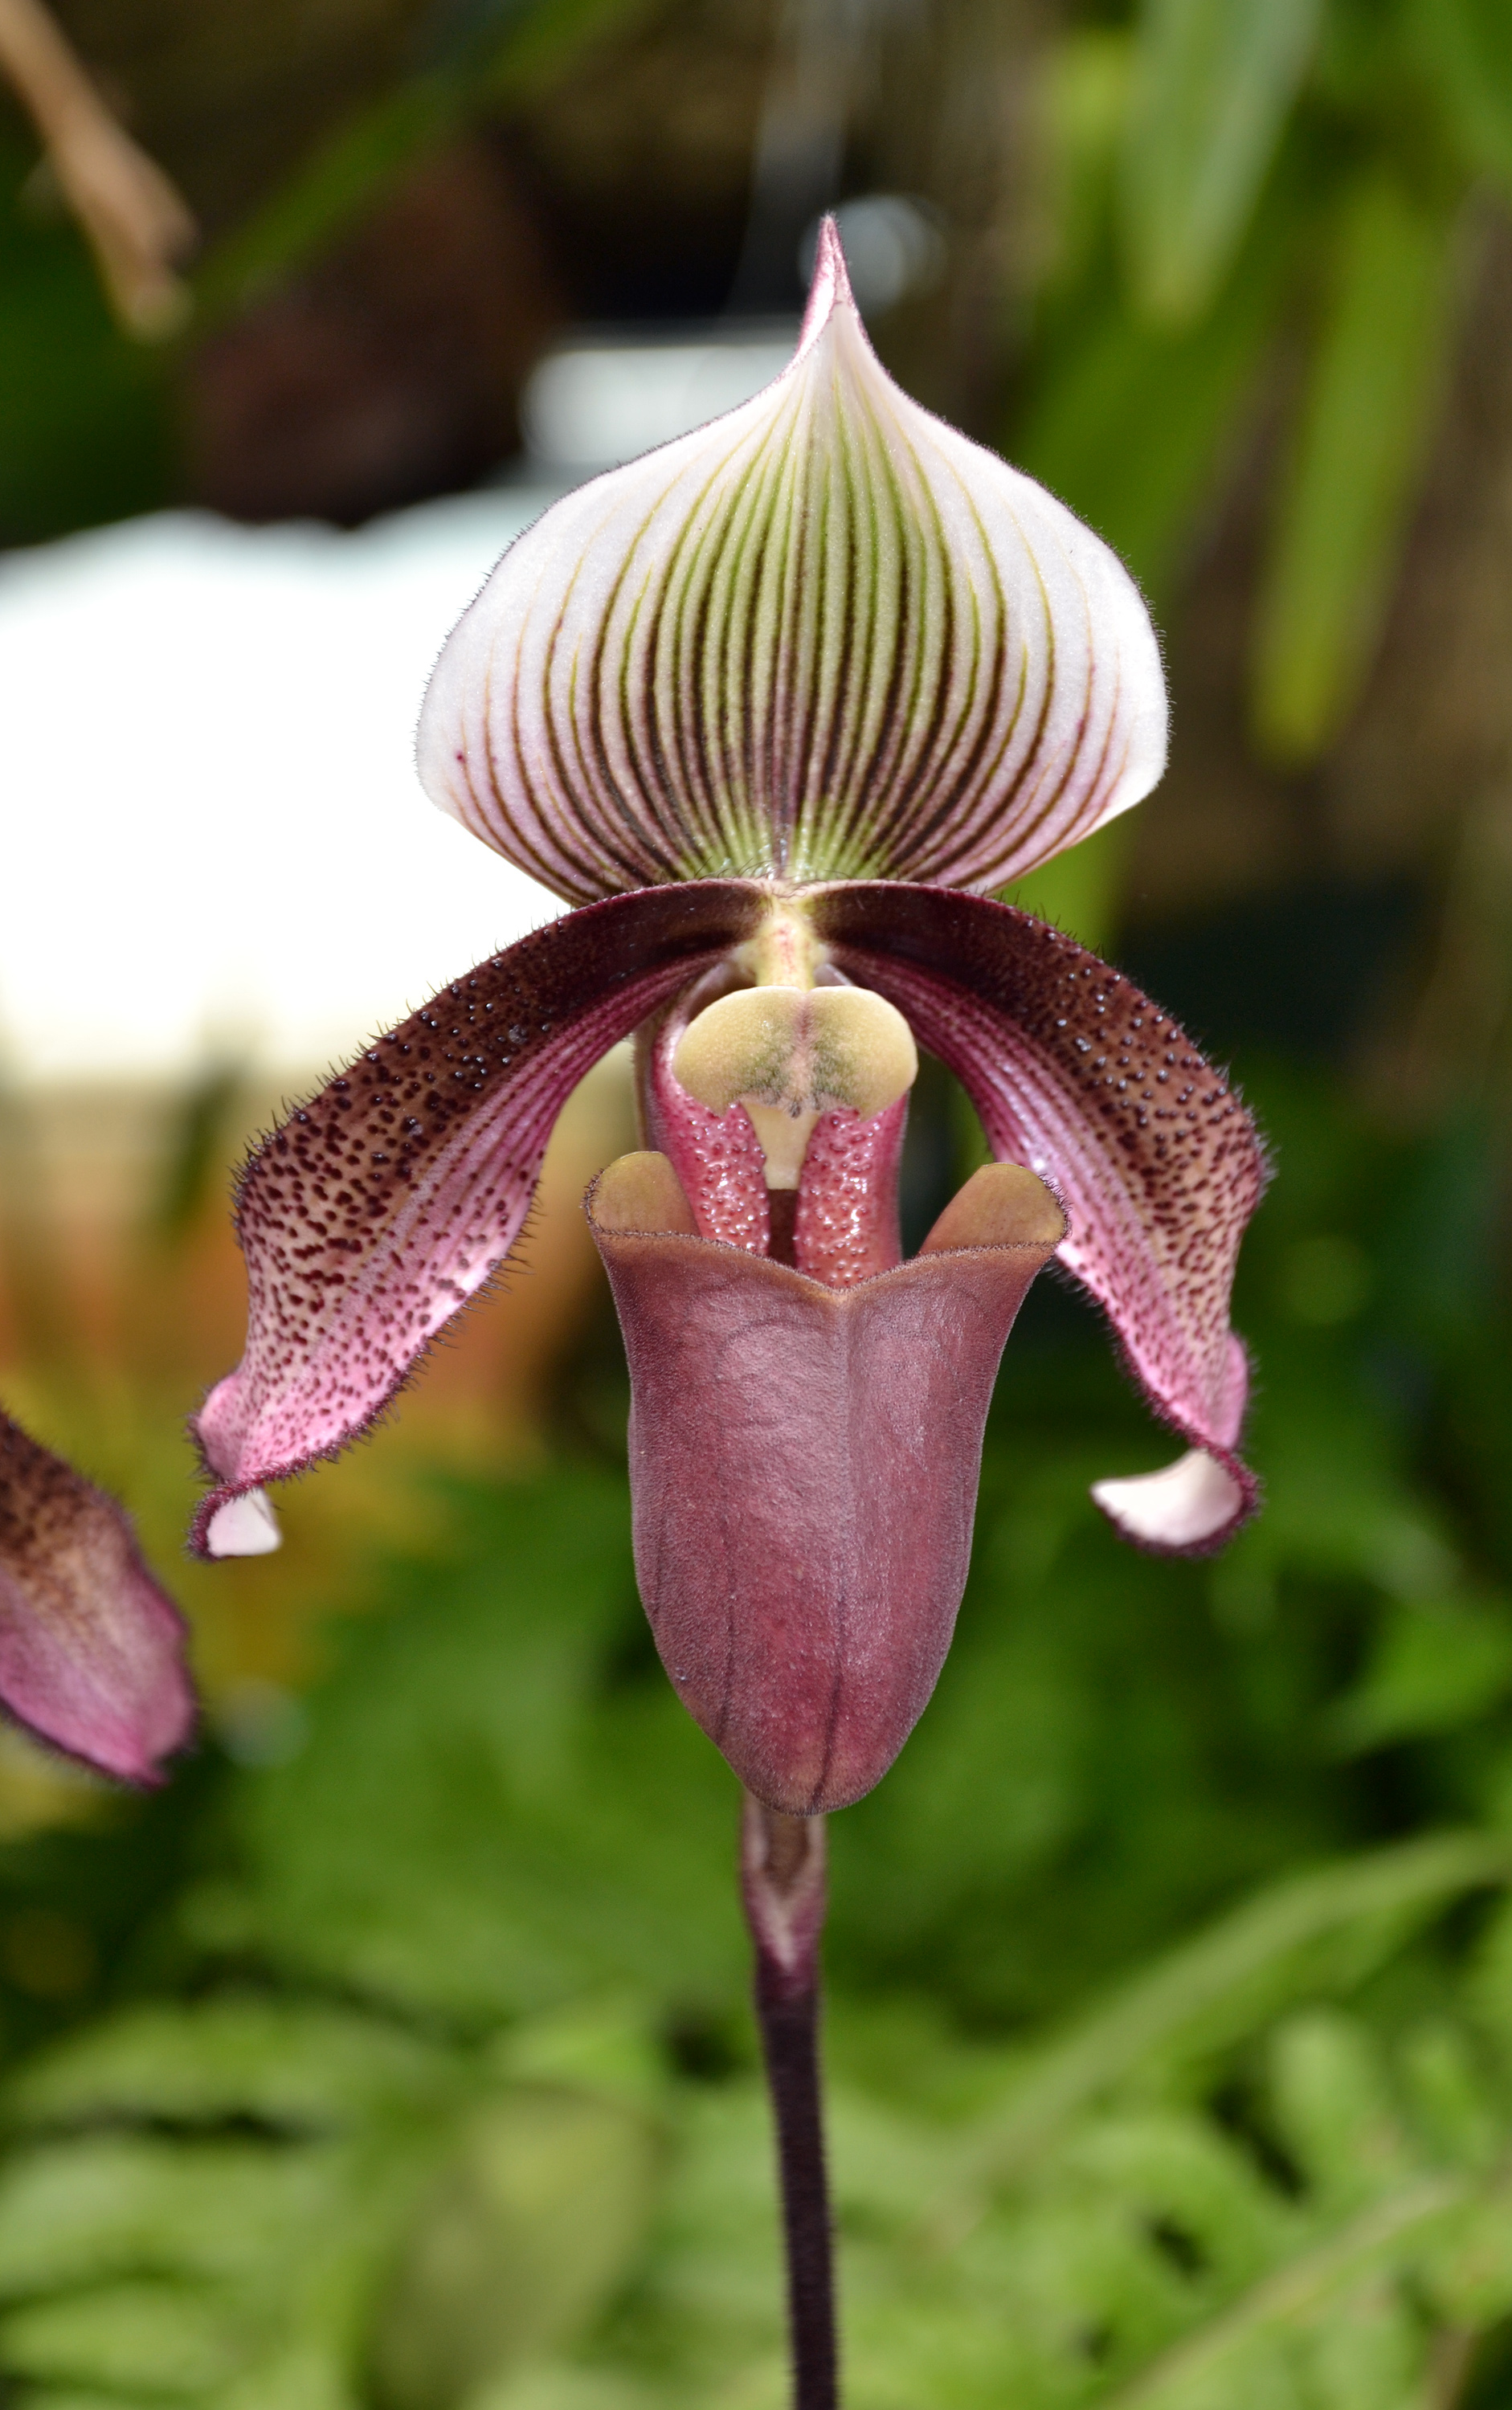 Slipper orchid, Asia, Herbaceous, Temperate, Small, HQ Photo